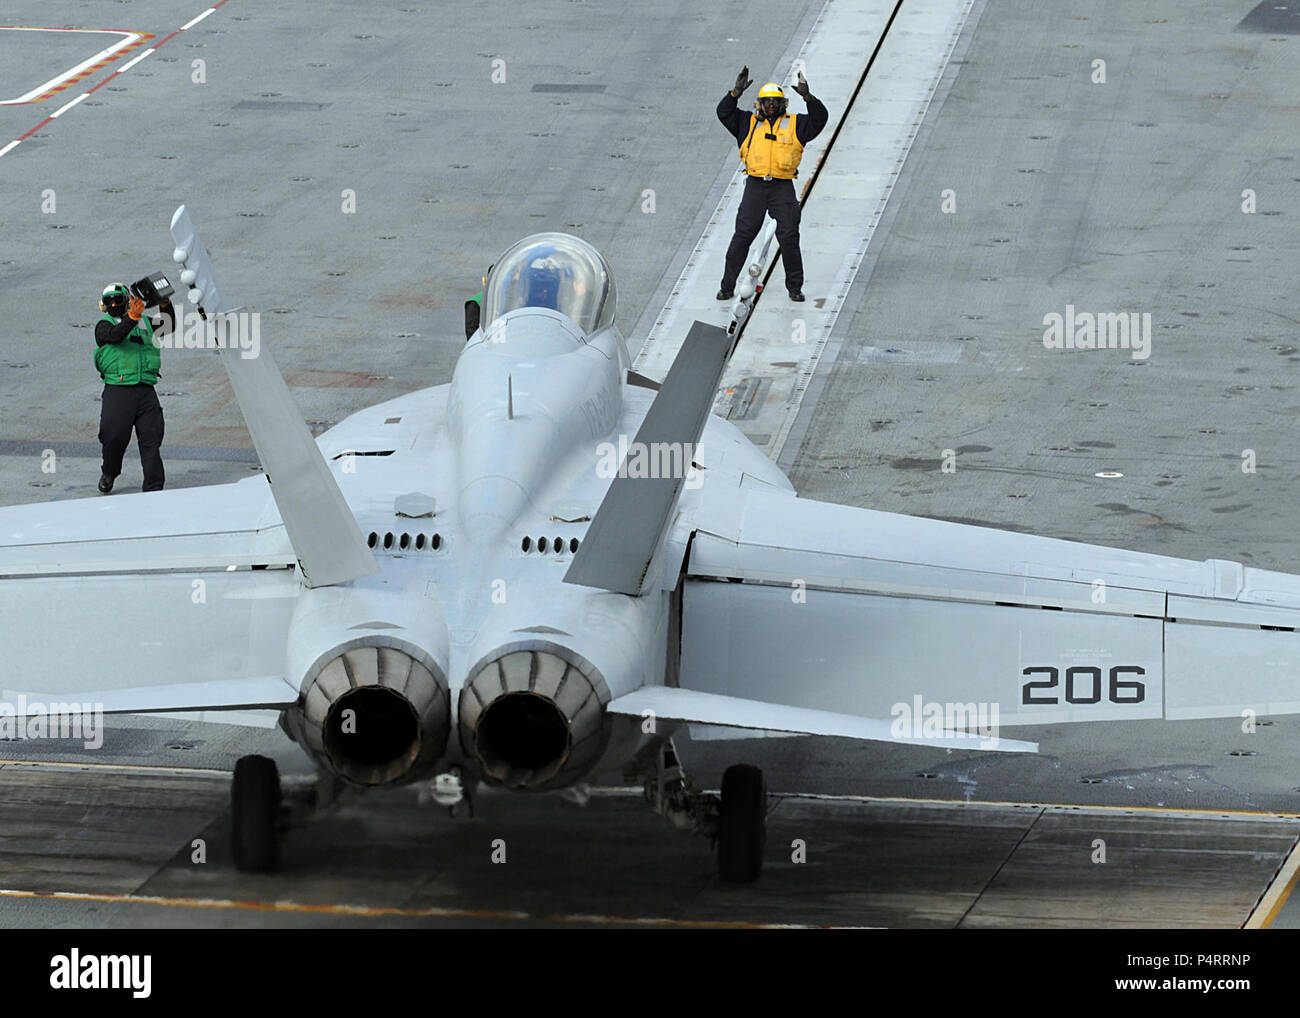 Flight deck personnel direct an F/A-18F Super Hornet from Strike Fighter Squadron (VFA) 213 aboard the aircraft carrier USS George H.W. Bush (CVN 77) Feb. 3, 2010, in the Atlantic Ocean. The ship is under way in the Atlantic Ocean conducting flight deck certification. Stock Photo